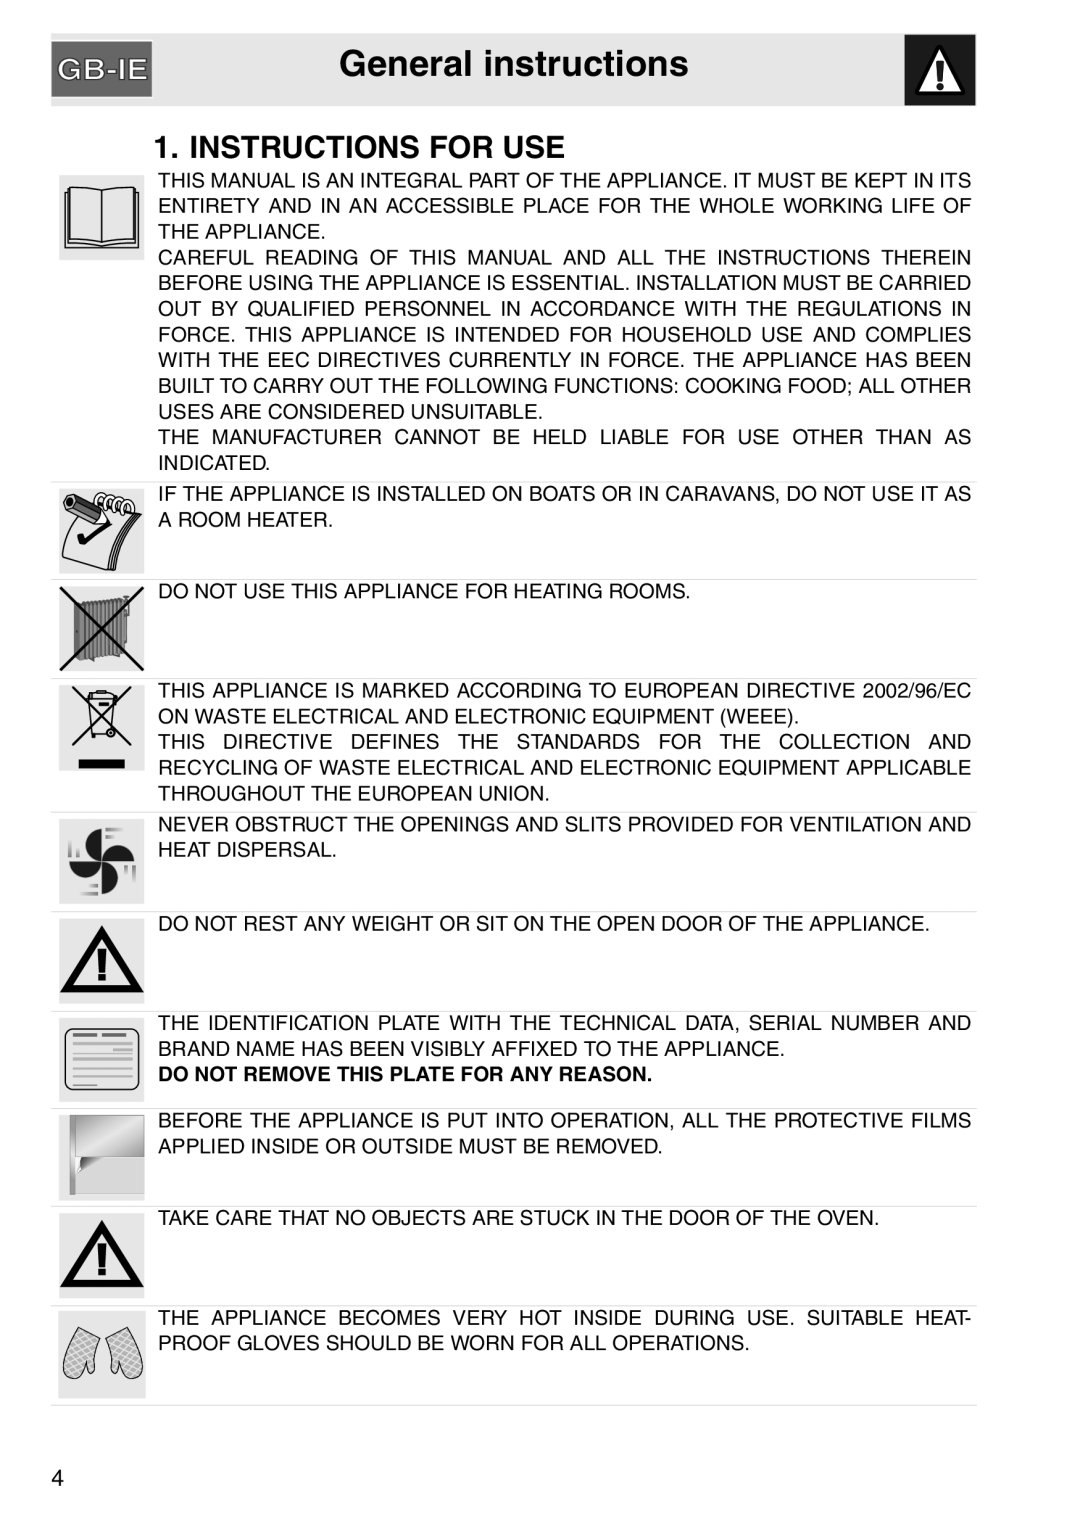 Smeg SAP306X-9, electric oven General instructions, Instructions For Use, Do Not Remove This Plate For Any Reason 